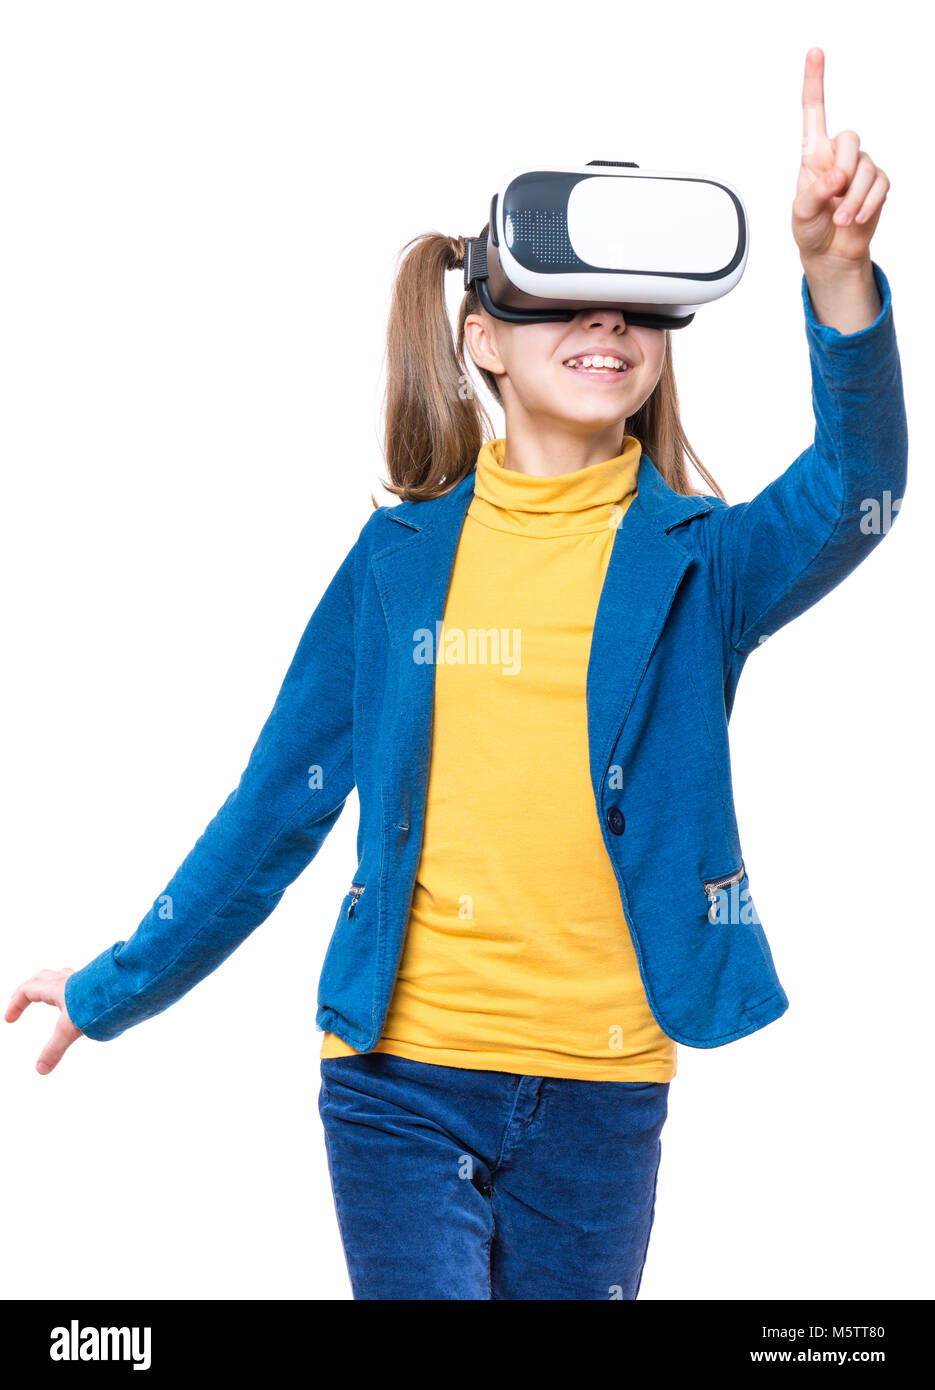 Little girl with VR glasses Stock Photo